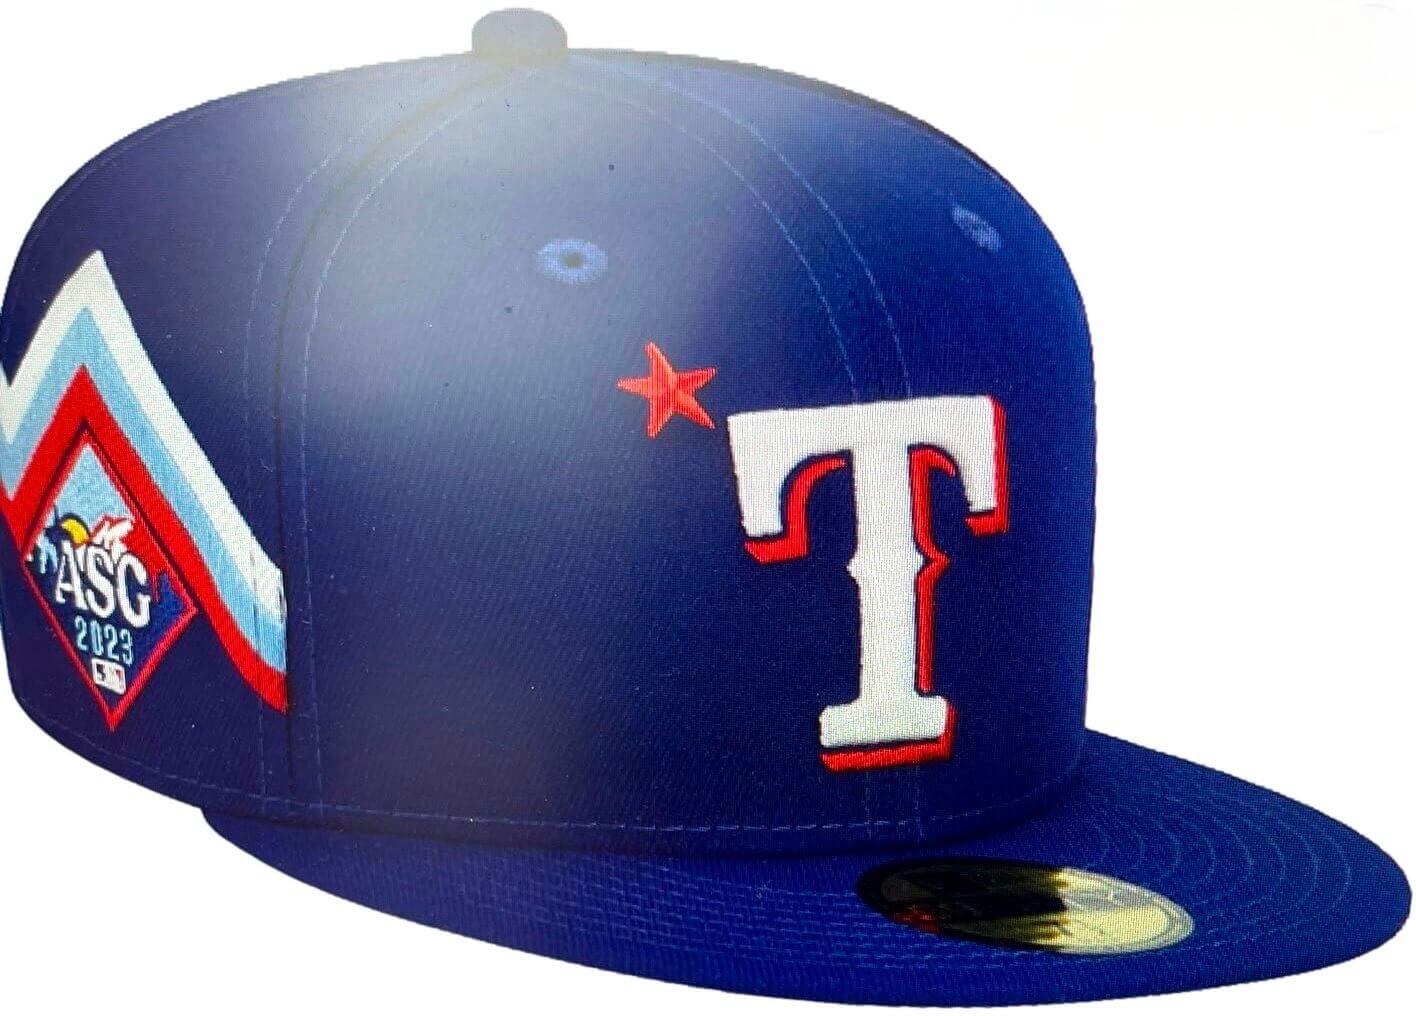 UPDATED: Our First Look at the 2023 MLB All-Star Game Caps